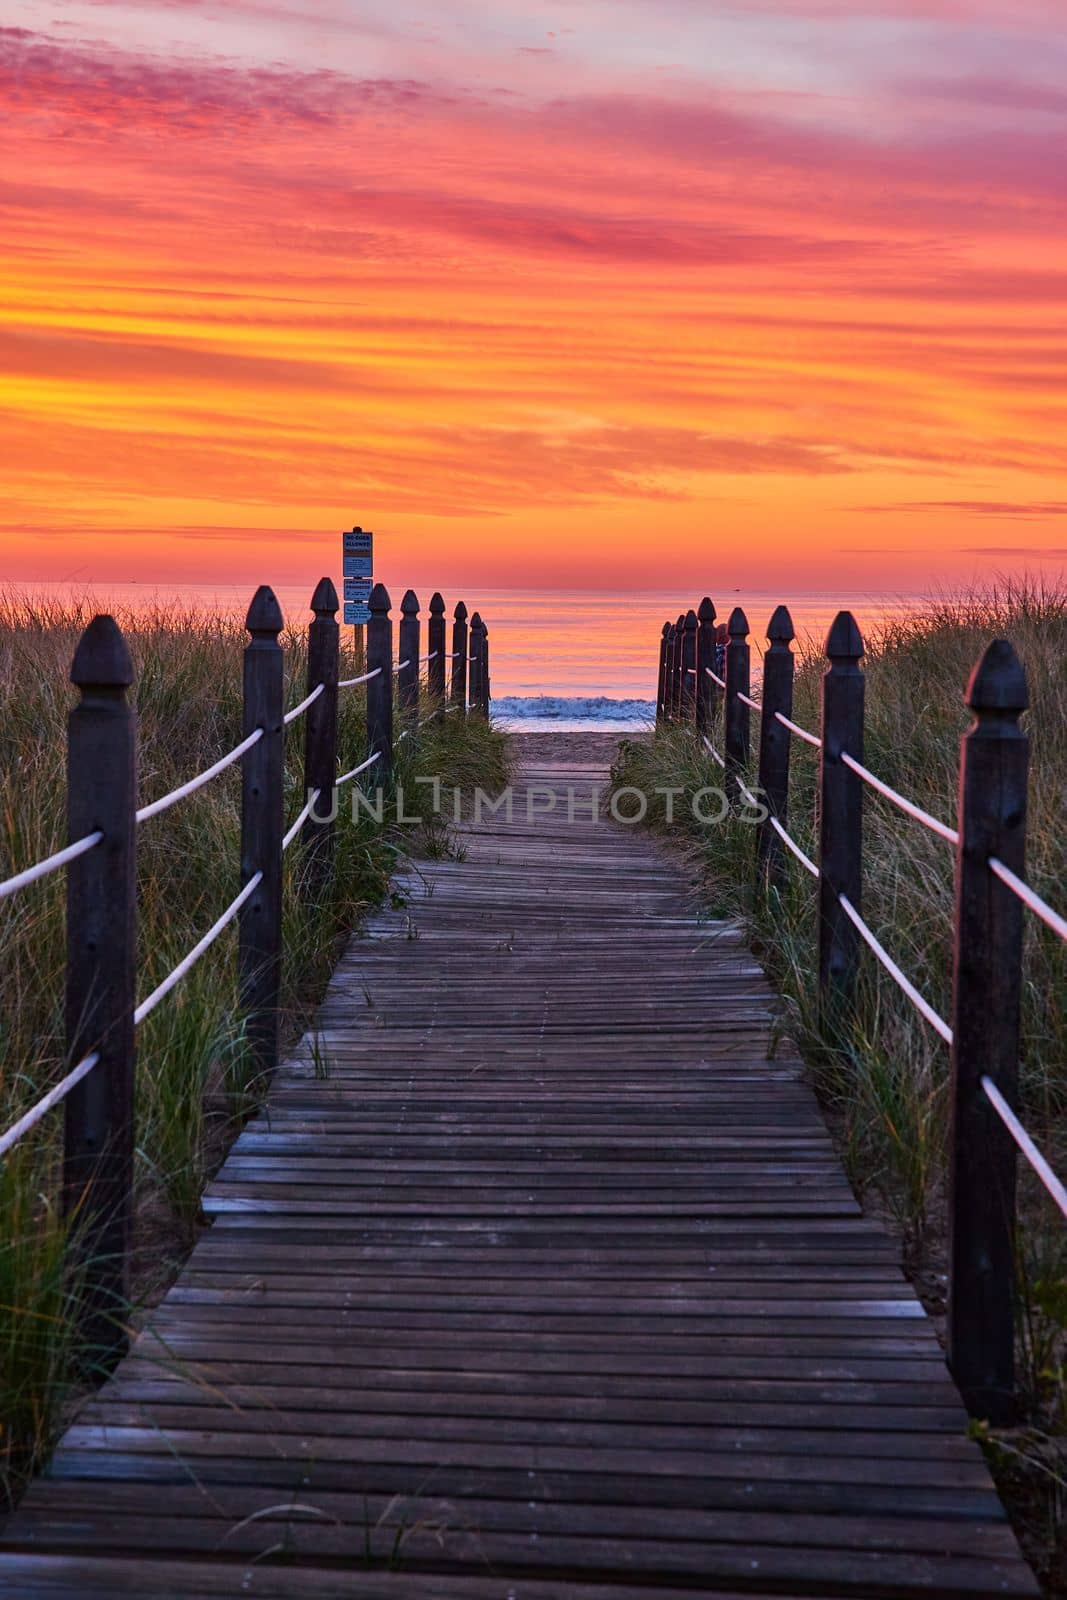 Orange and red sunrise light with straight boardwalk path guiding you to beach by njproductions